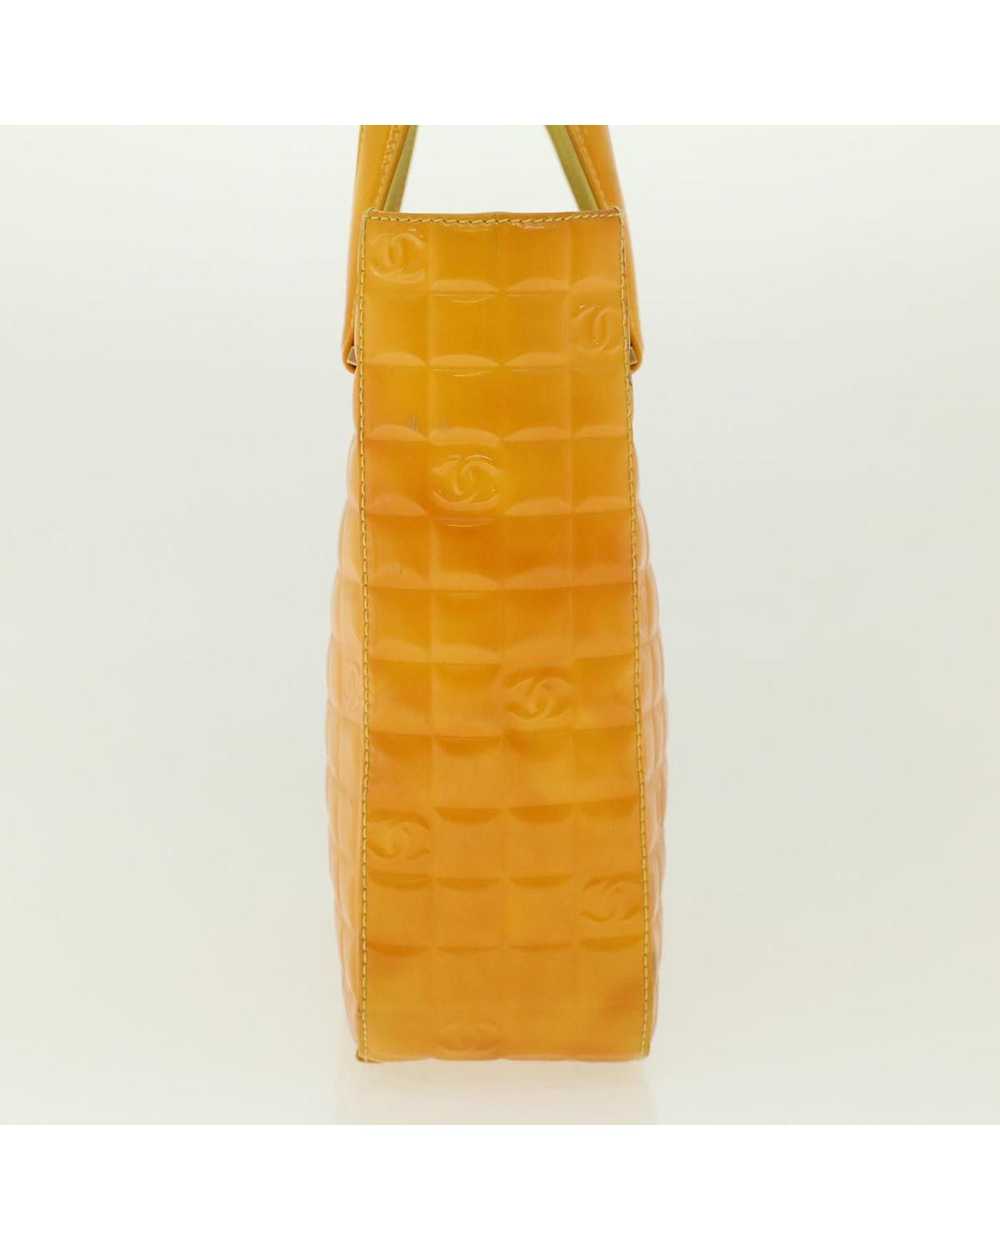 Chanel Yellow Patent Leather Hand Bag - image 3